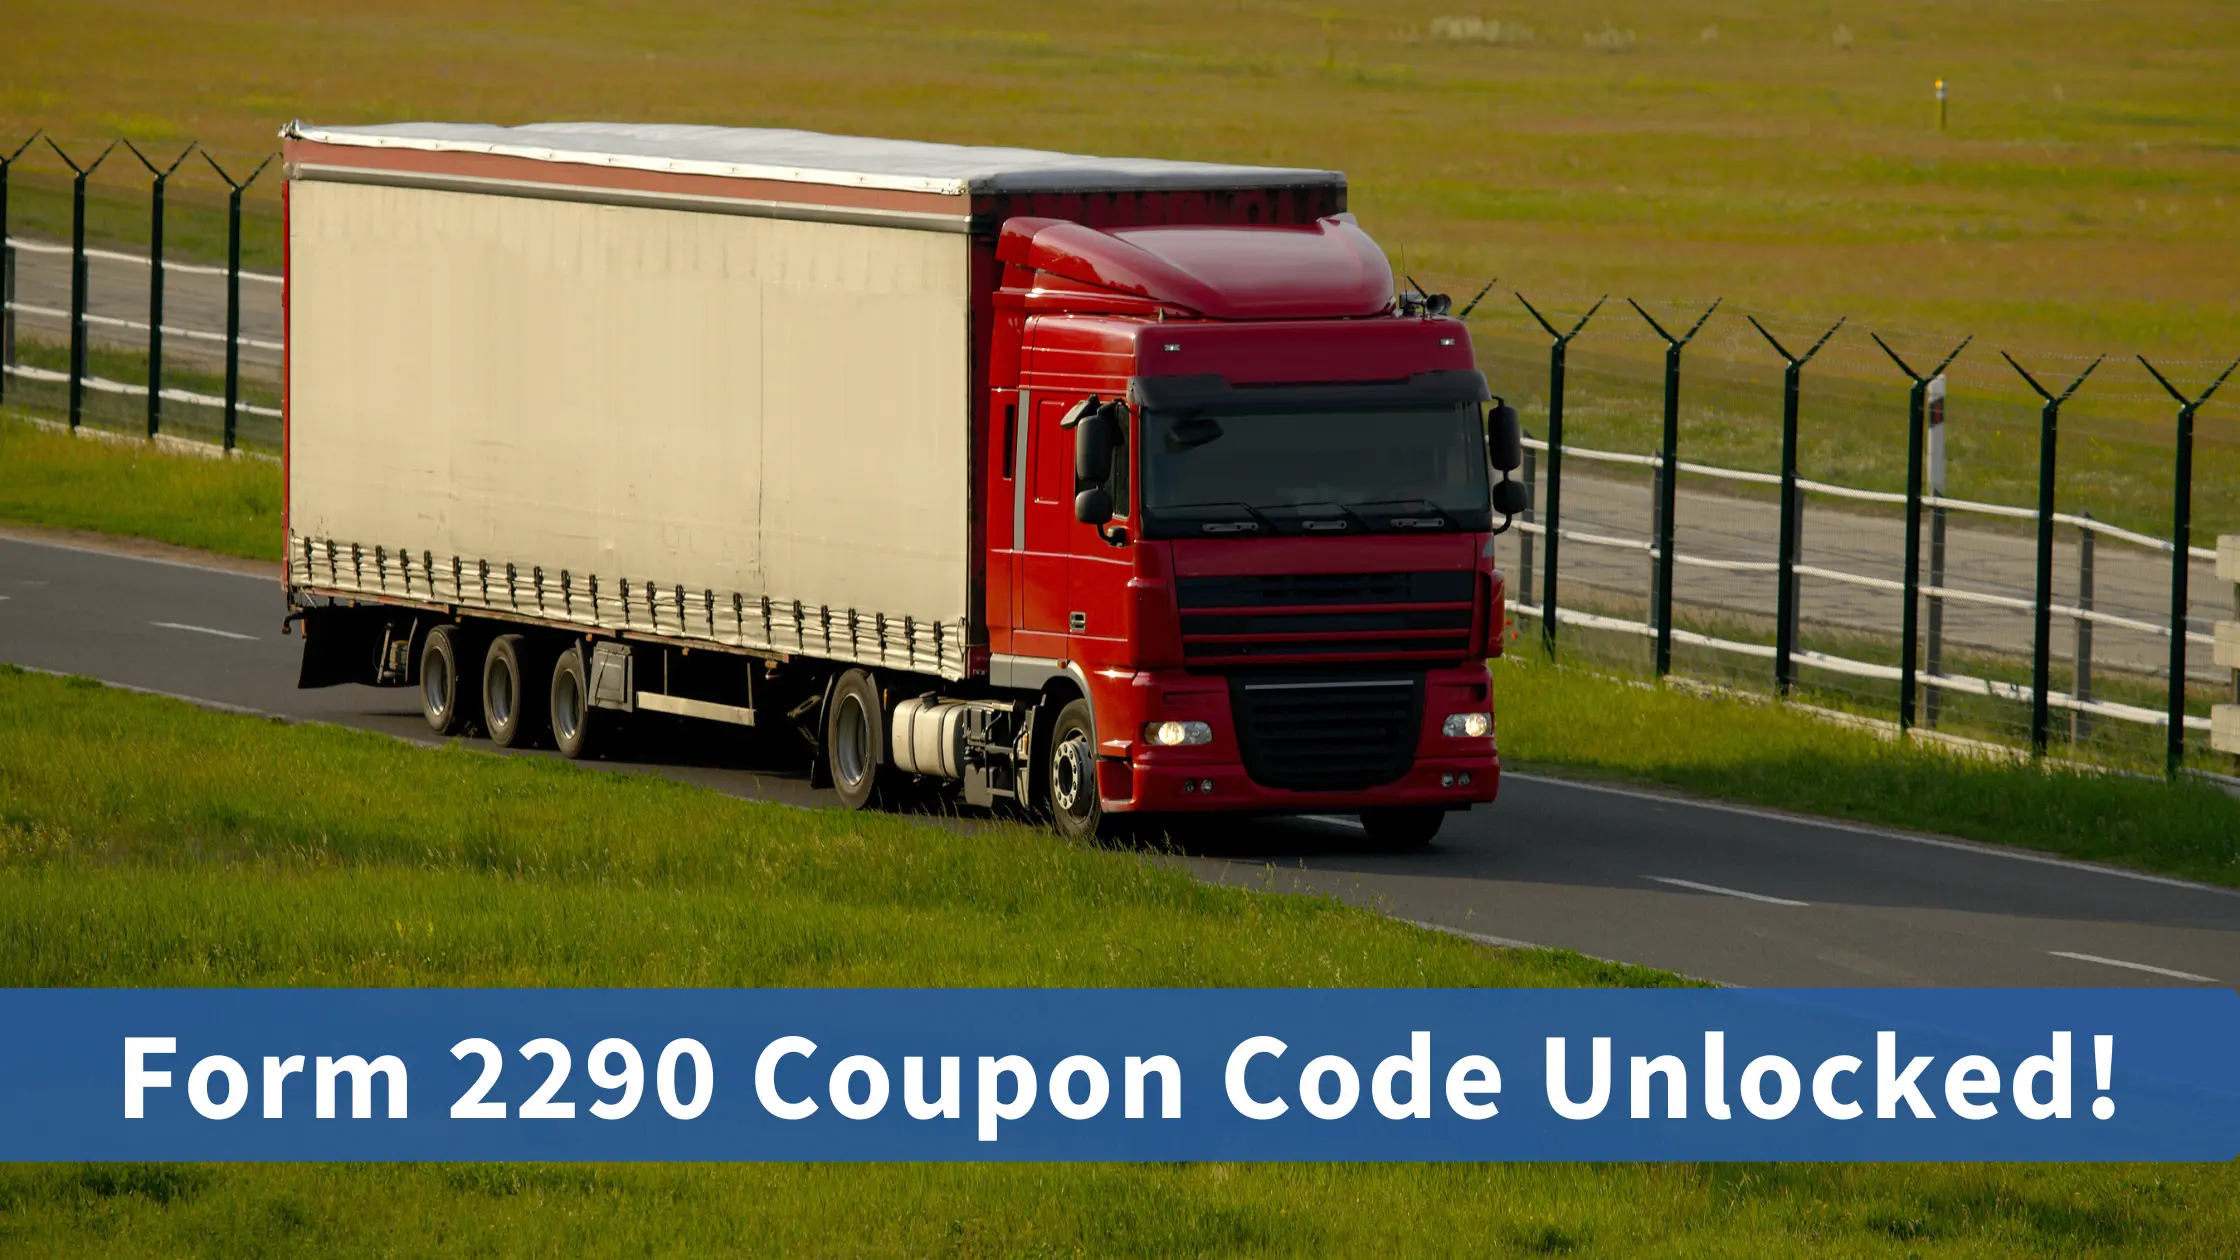 Form 2290 Coupon Code Unlocked